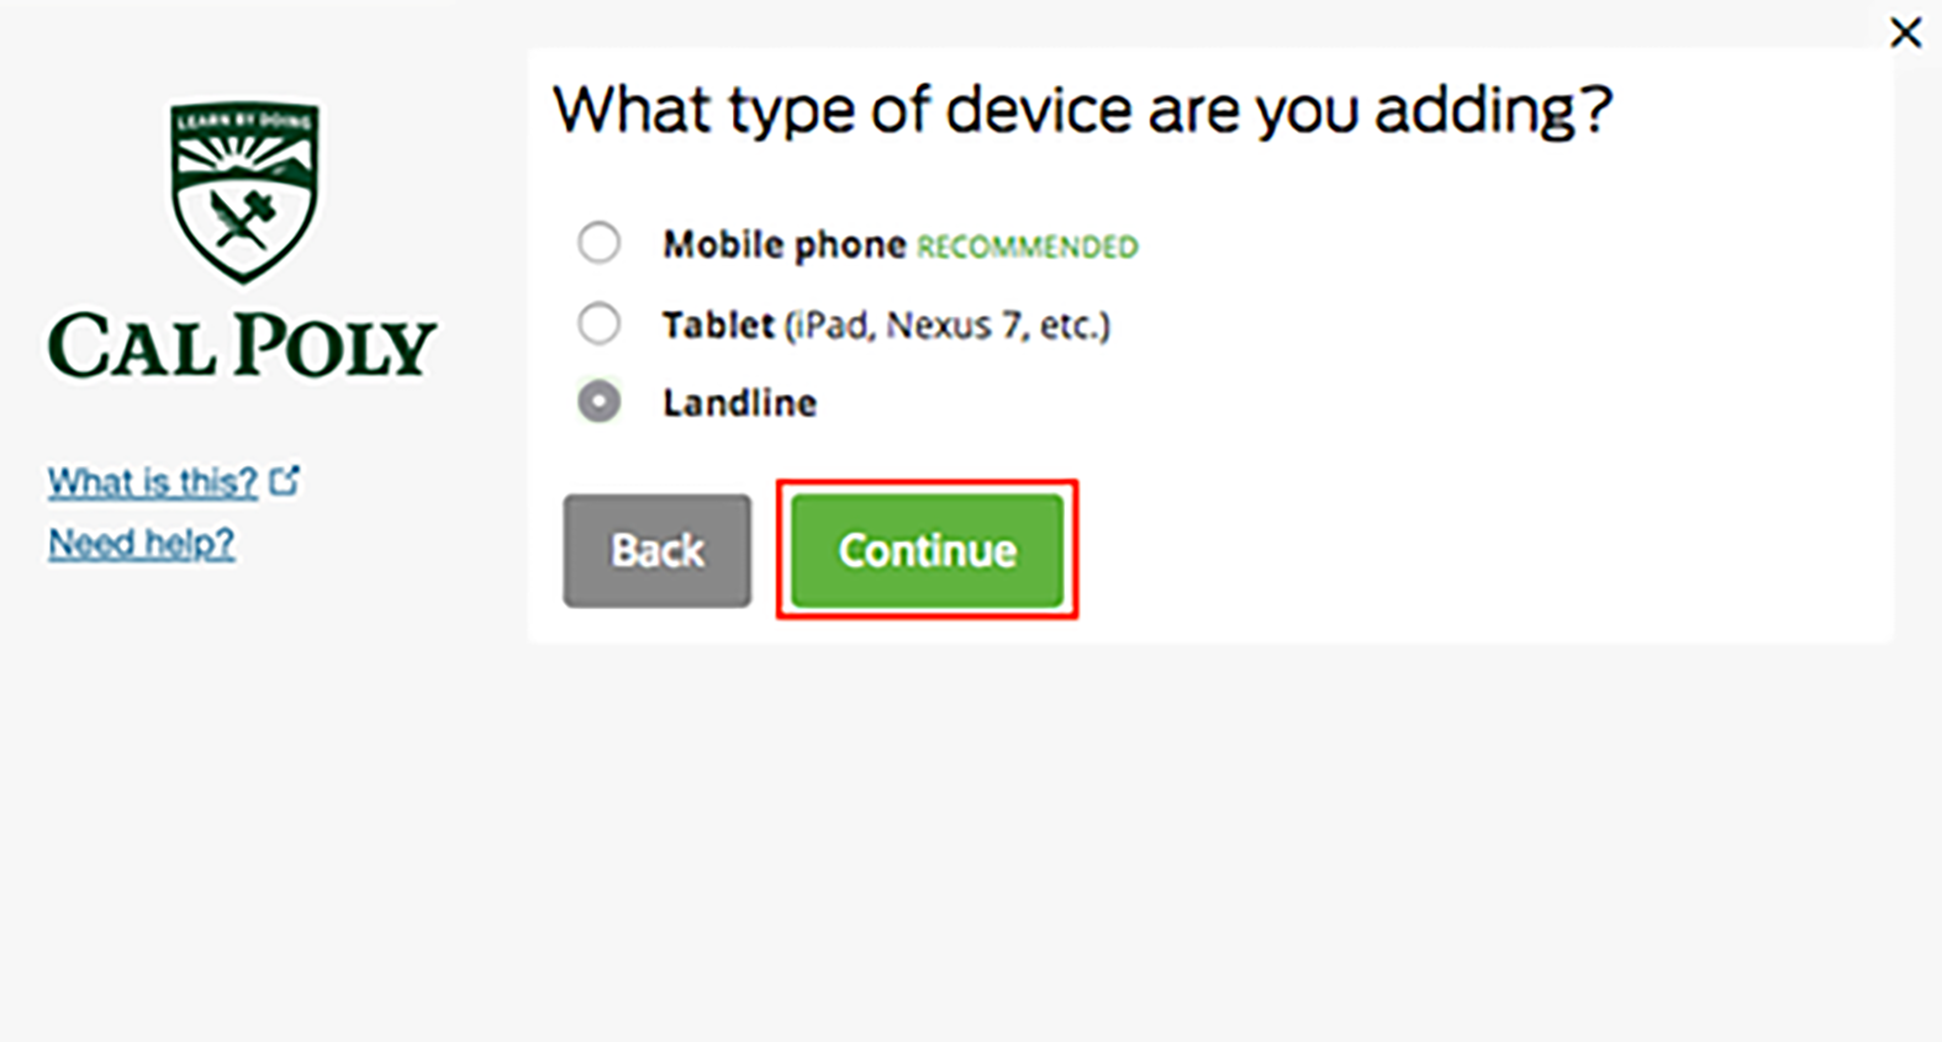 What type of device are you adding dialog box shown with Landline selected and Continue button highlighted.